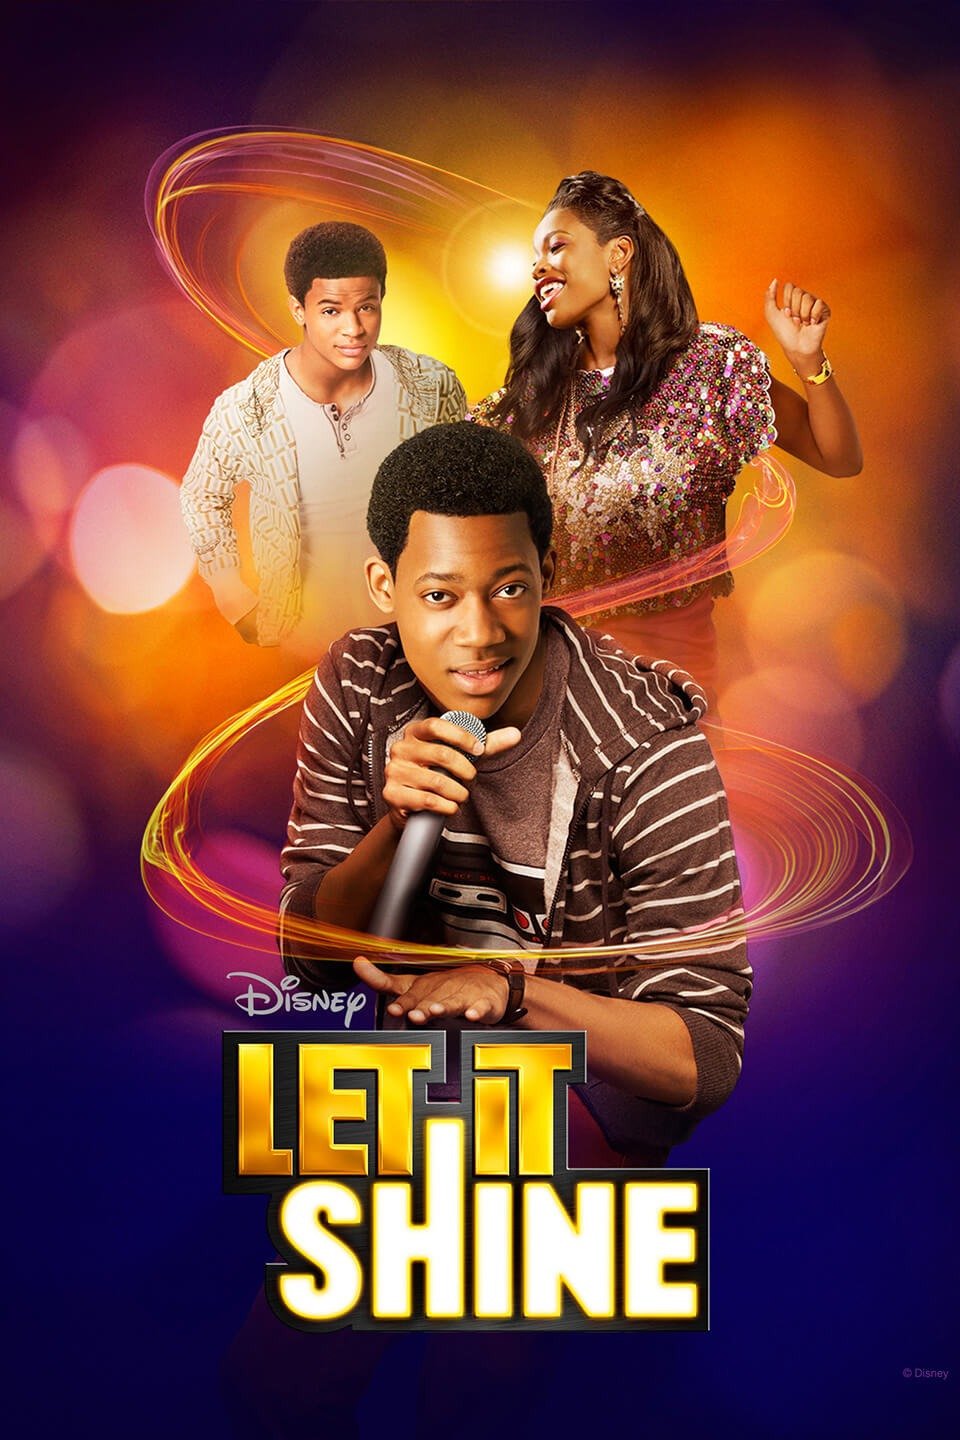 let it shine movie review